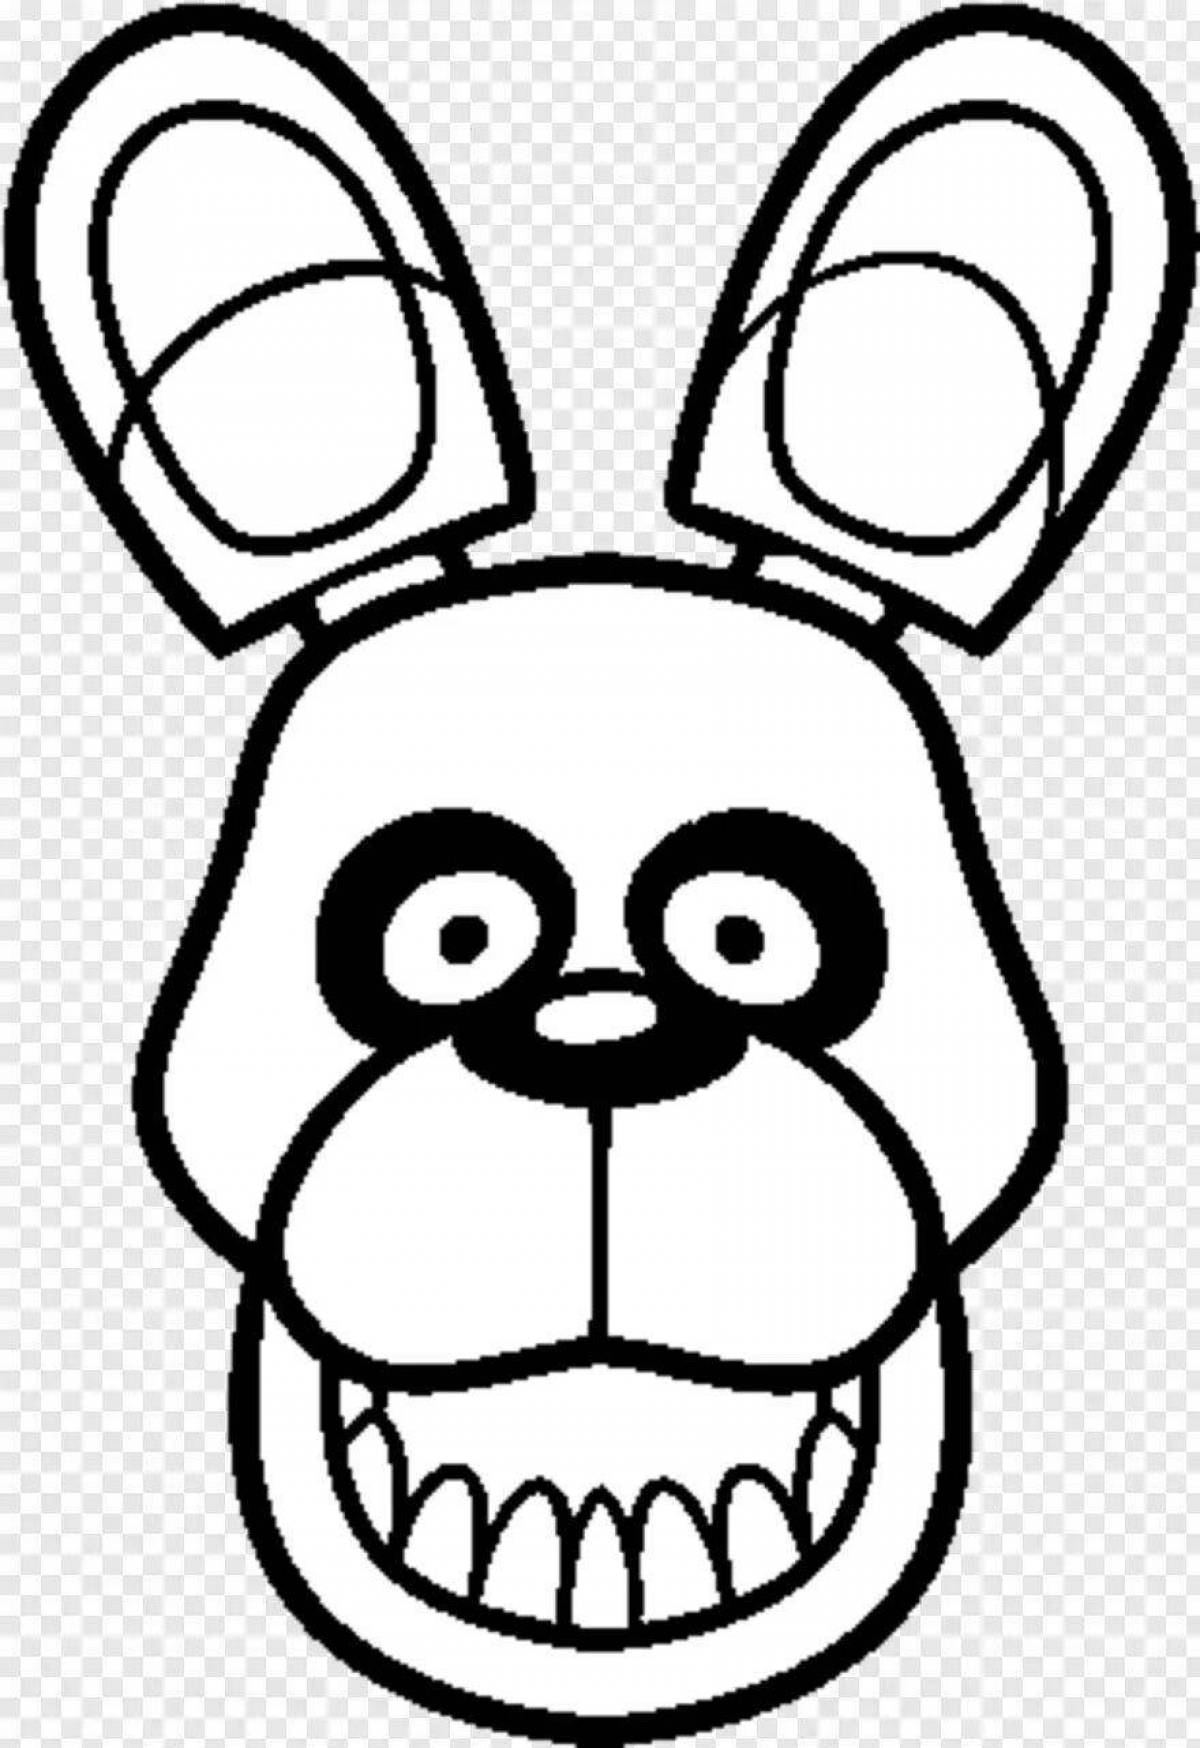 Coloring page energetic bonnie mask